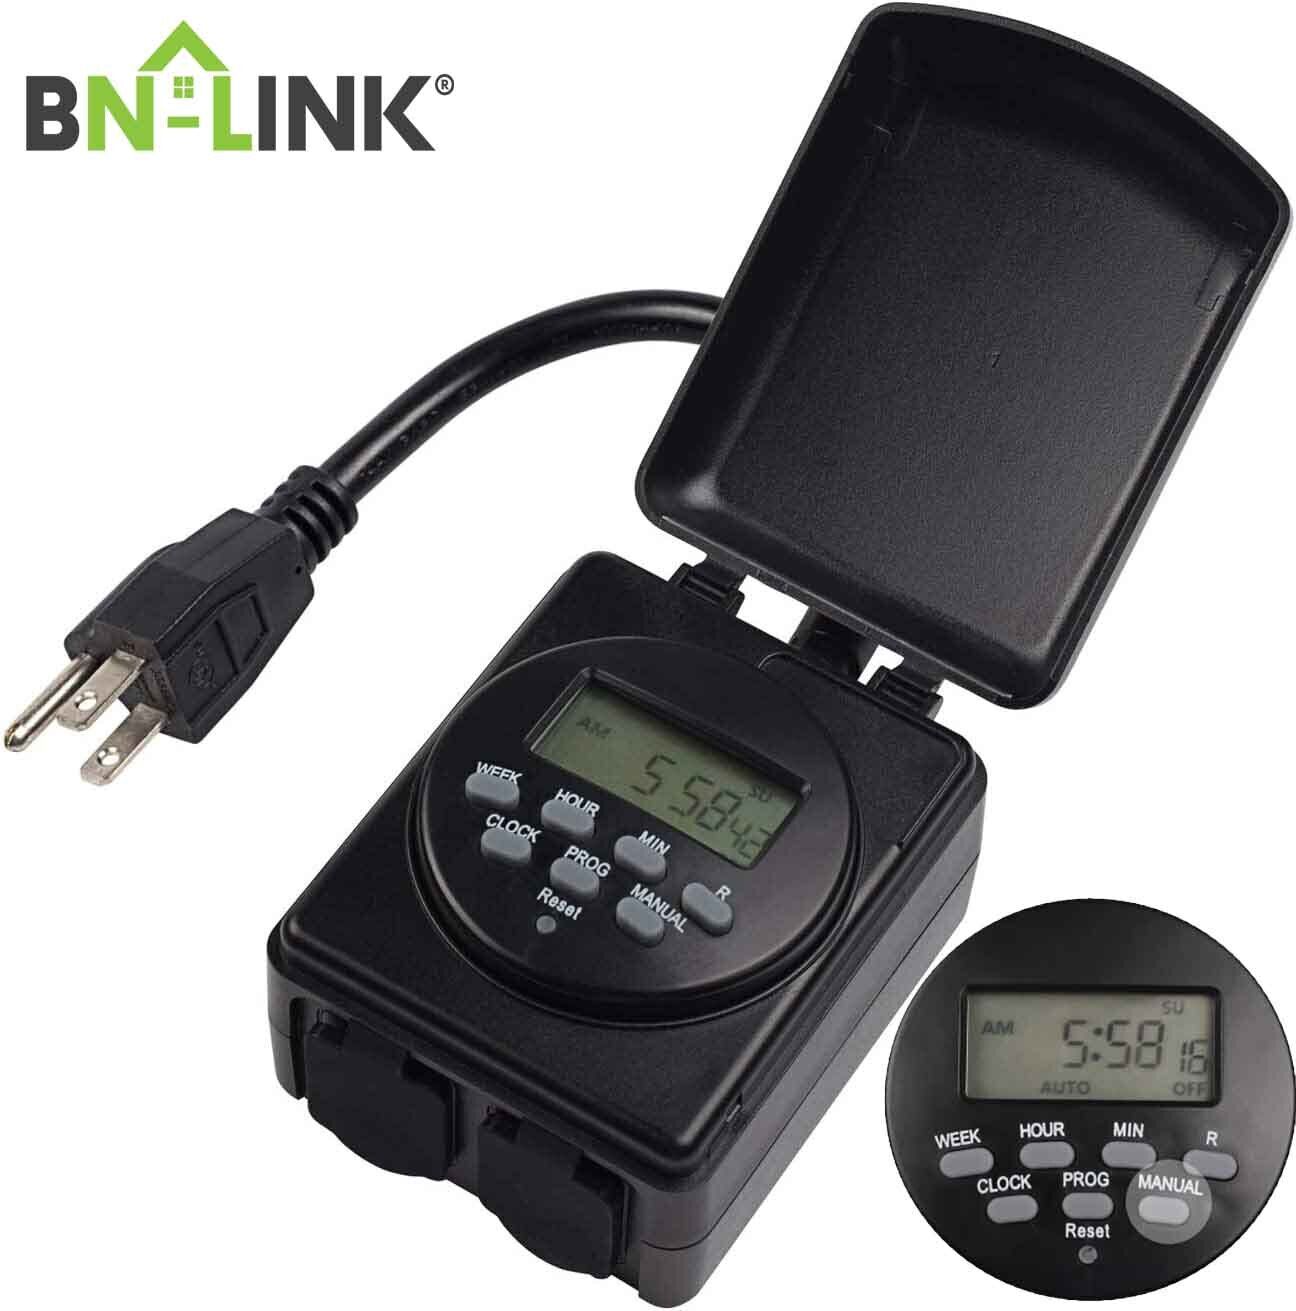 BN-LINK 7 Day Outdoor Heavy Duty Digital Programmable / Mechanical Outlet Timer